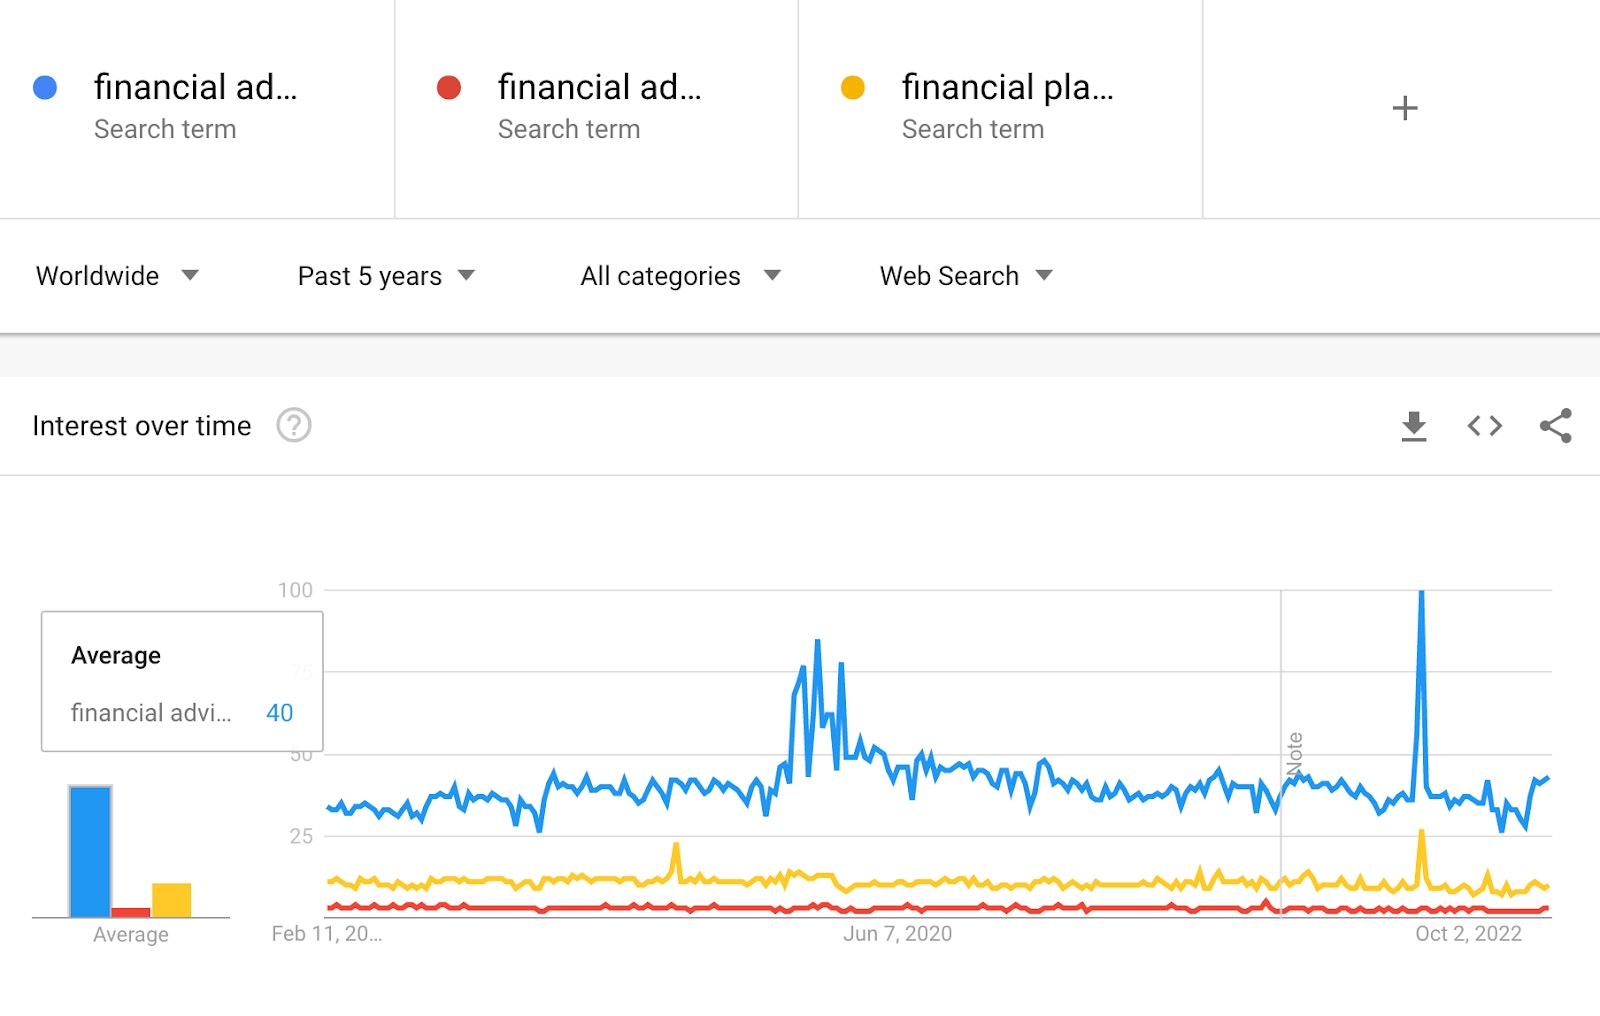 Line chart showing the search trend of three financial-related keywords, with “financial advisor” being most popular.